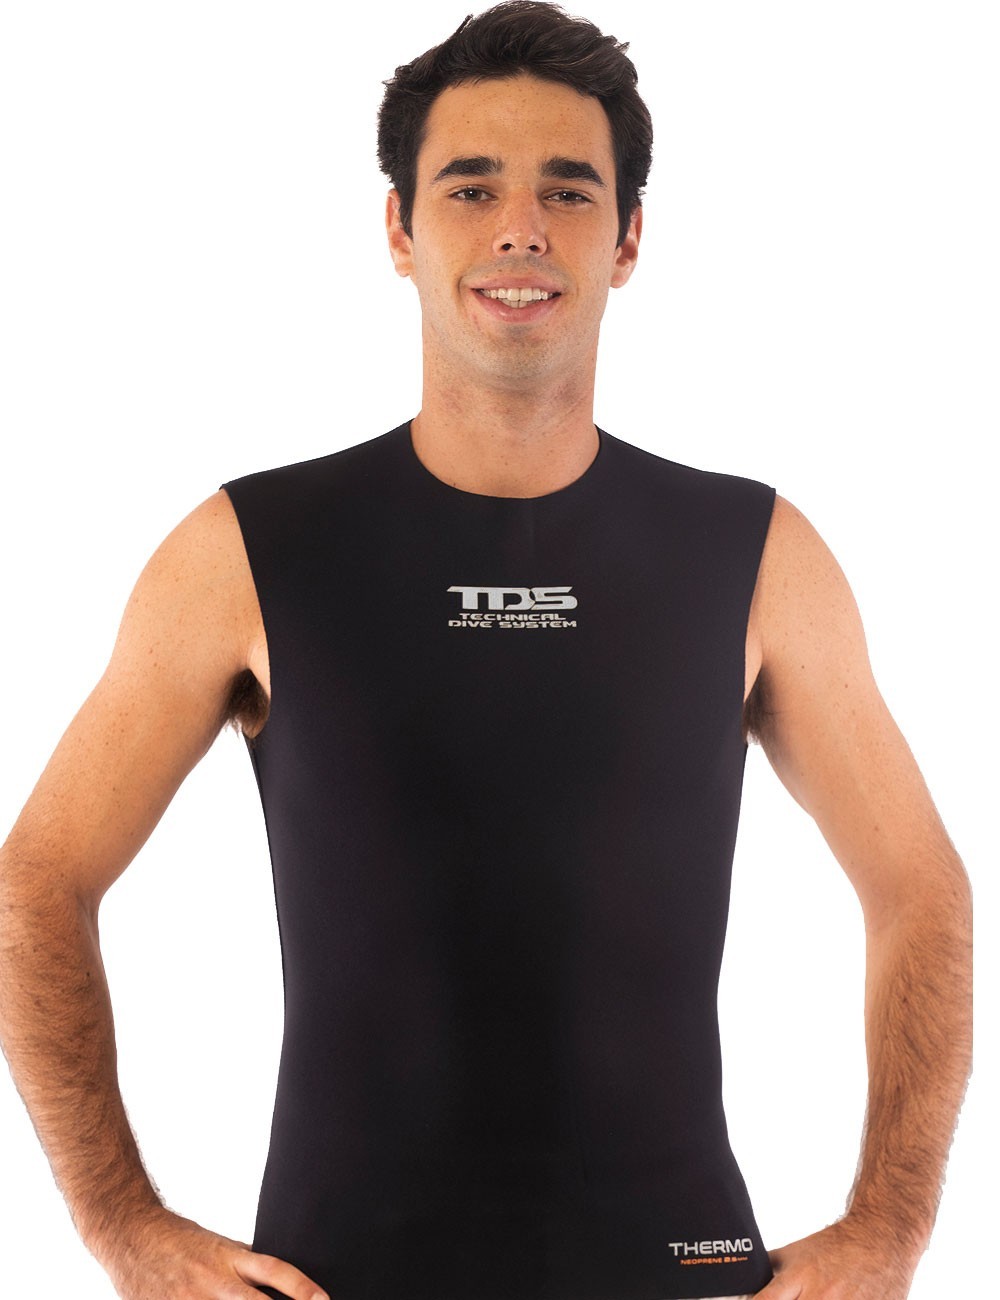 CHALECO CALOR NEOPRENO TDS THERMO 2.5 MM BUCEO HOMBRE